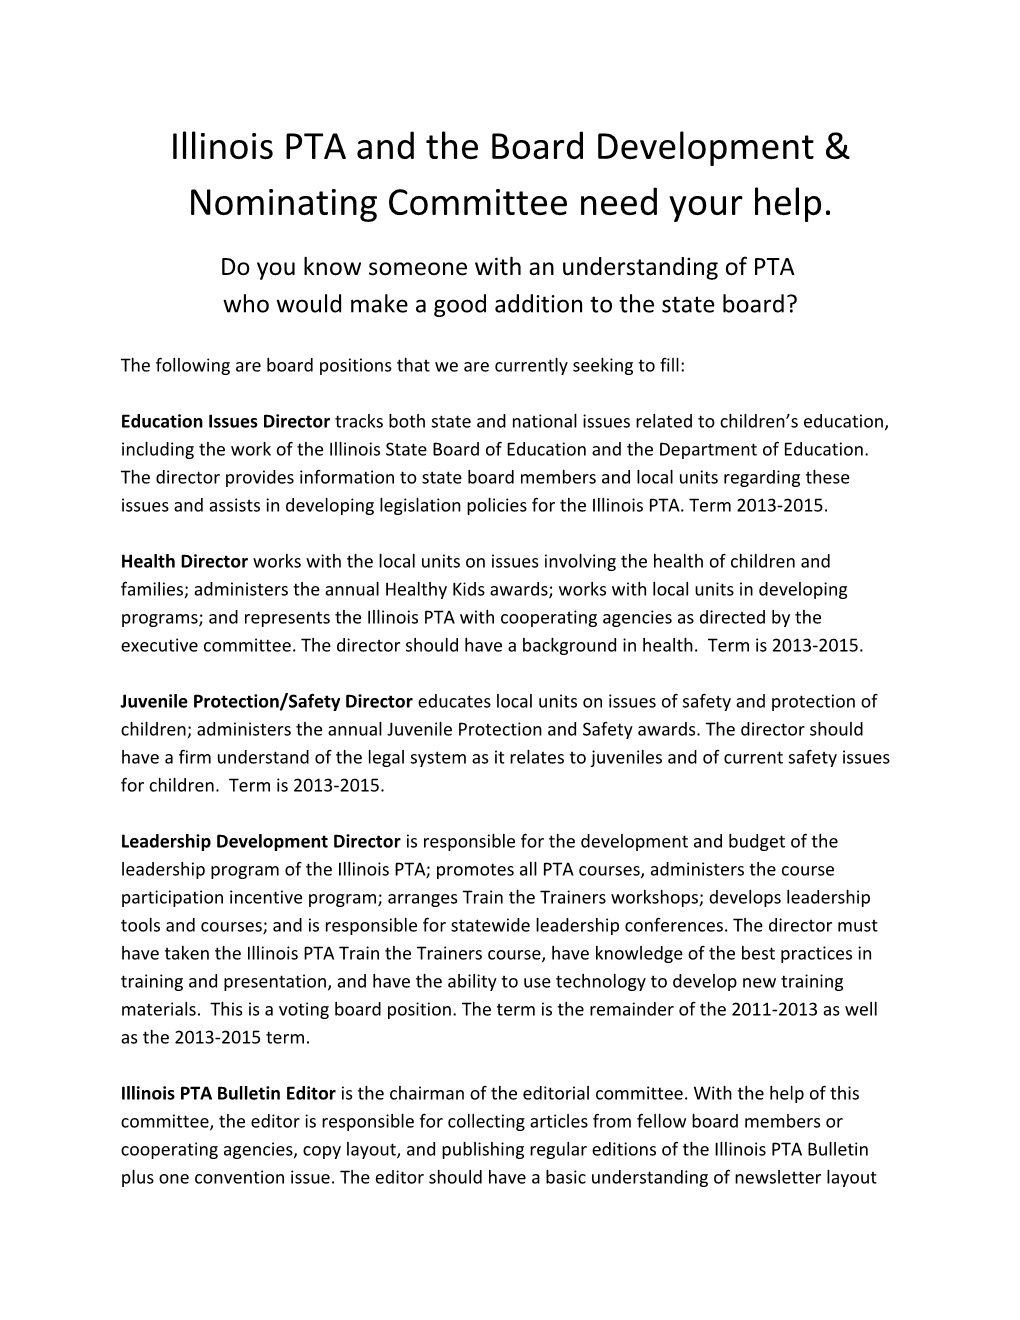 Illinois PTA and the Board Development & Nominating Committee Need Your Help